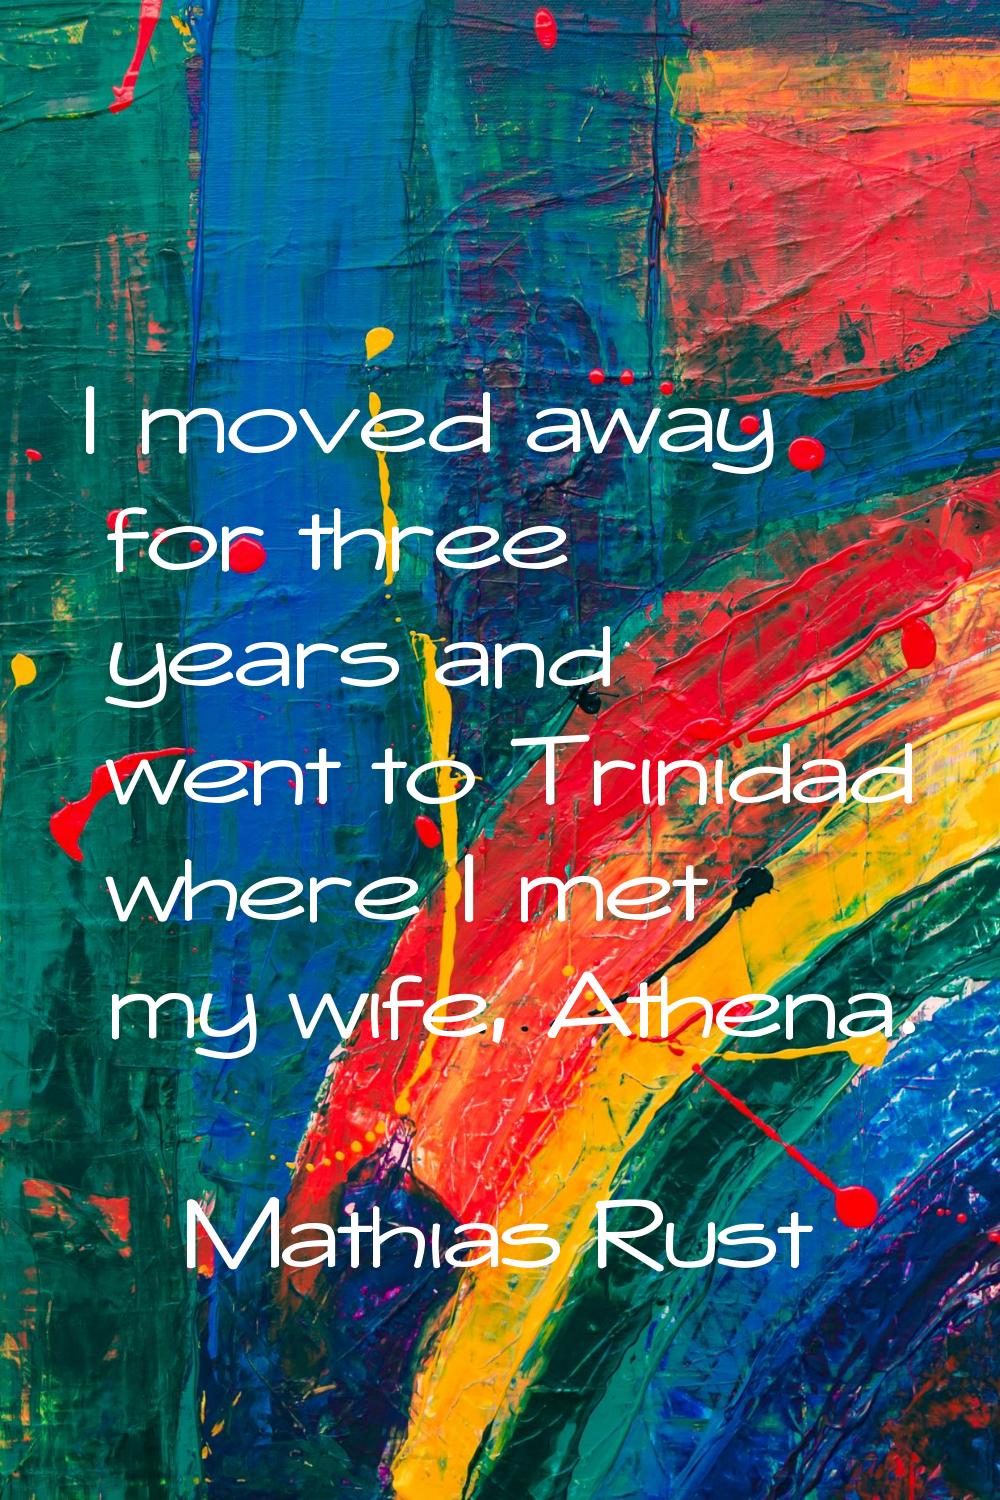 I moved away for three years and went to Trinidad where I met my wife, Athena.